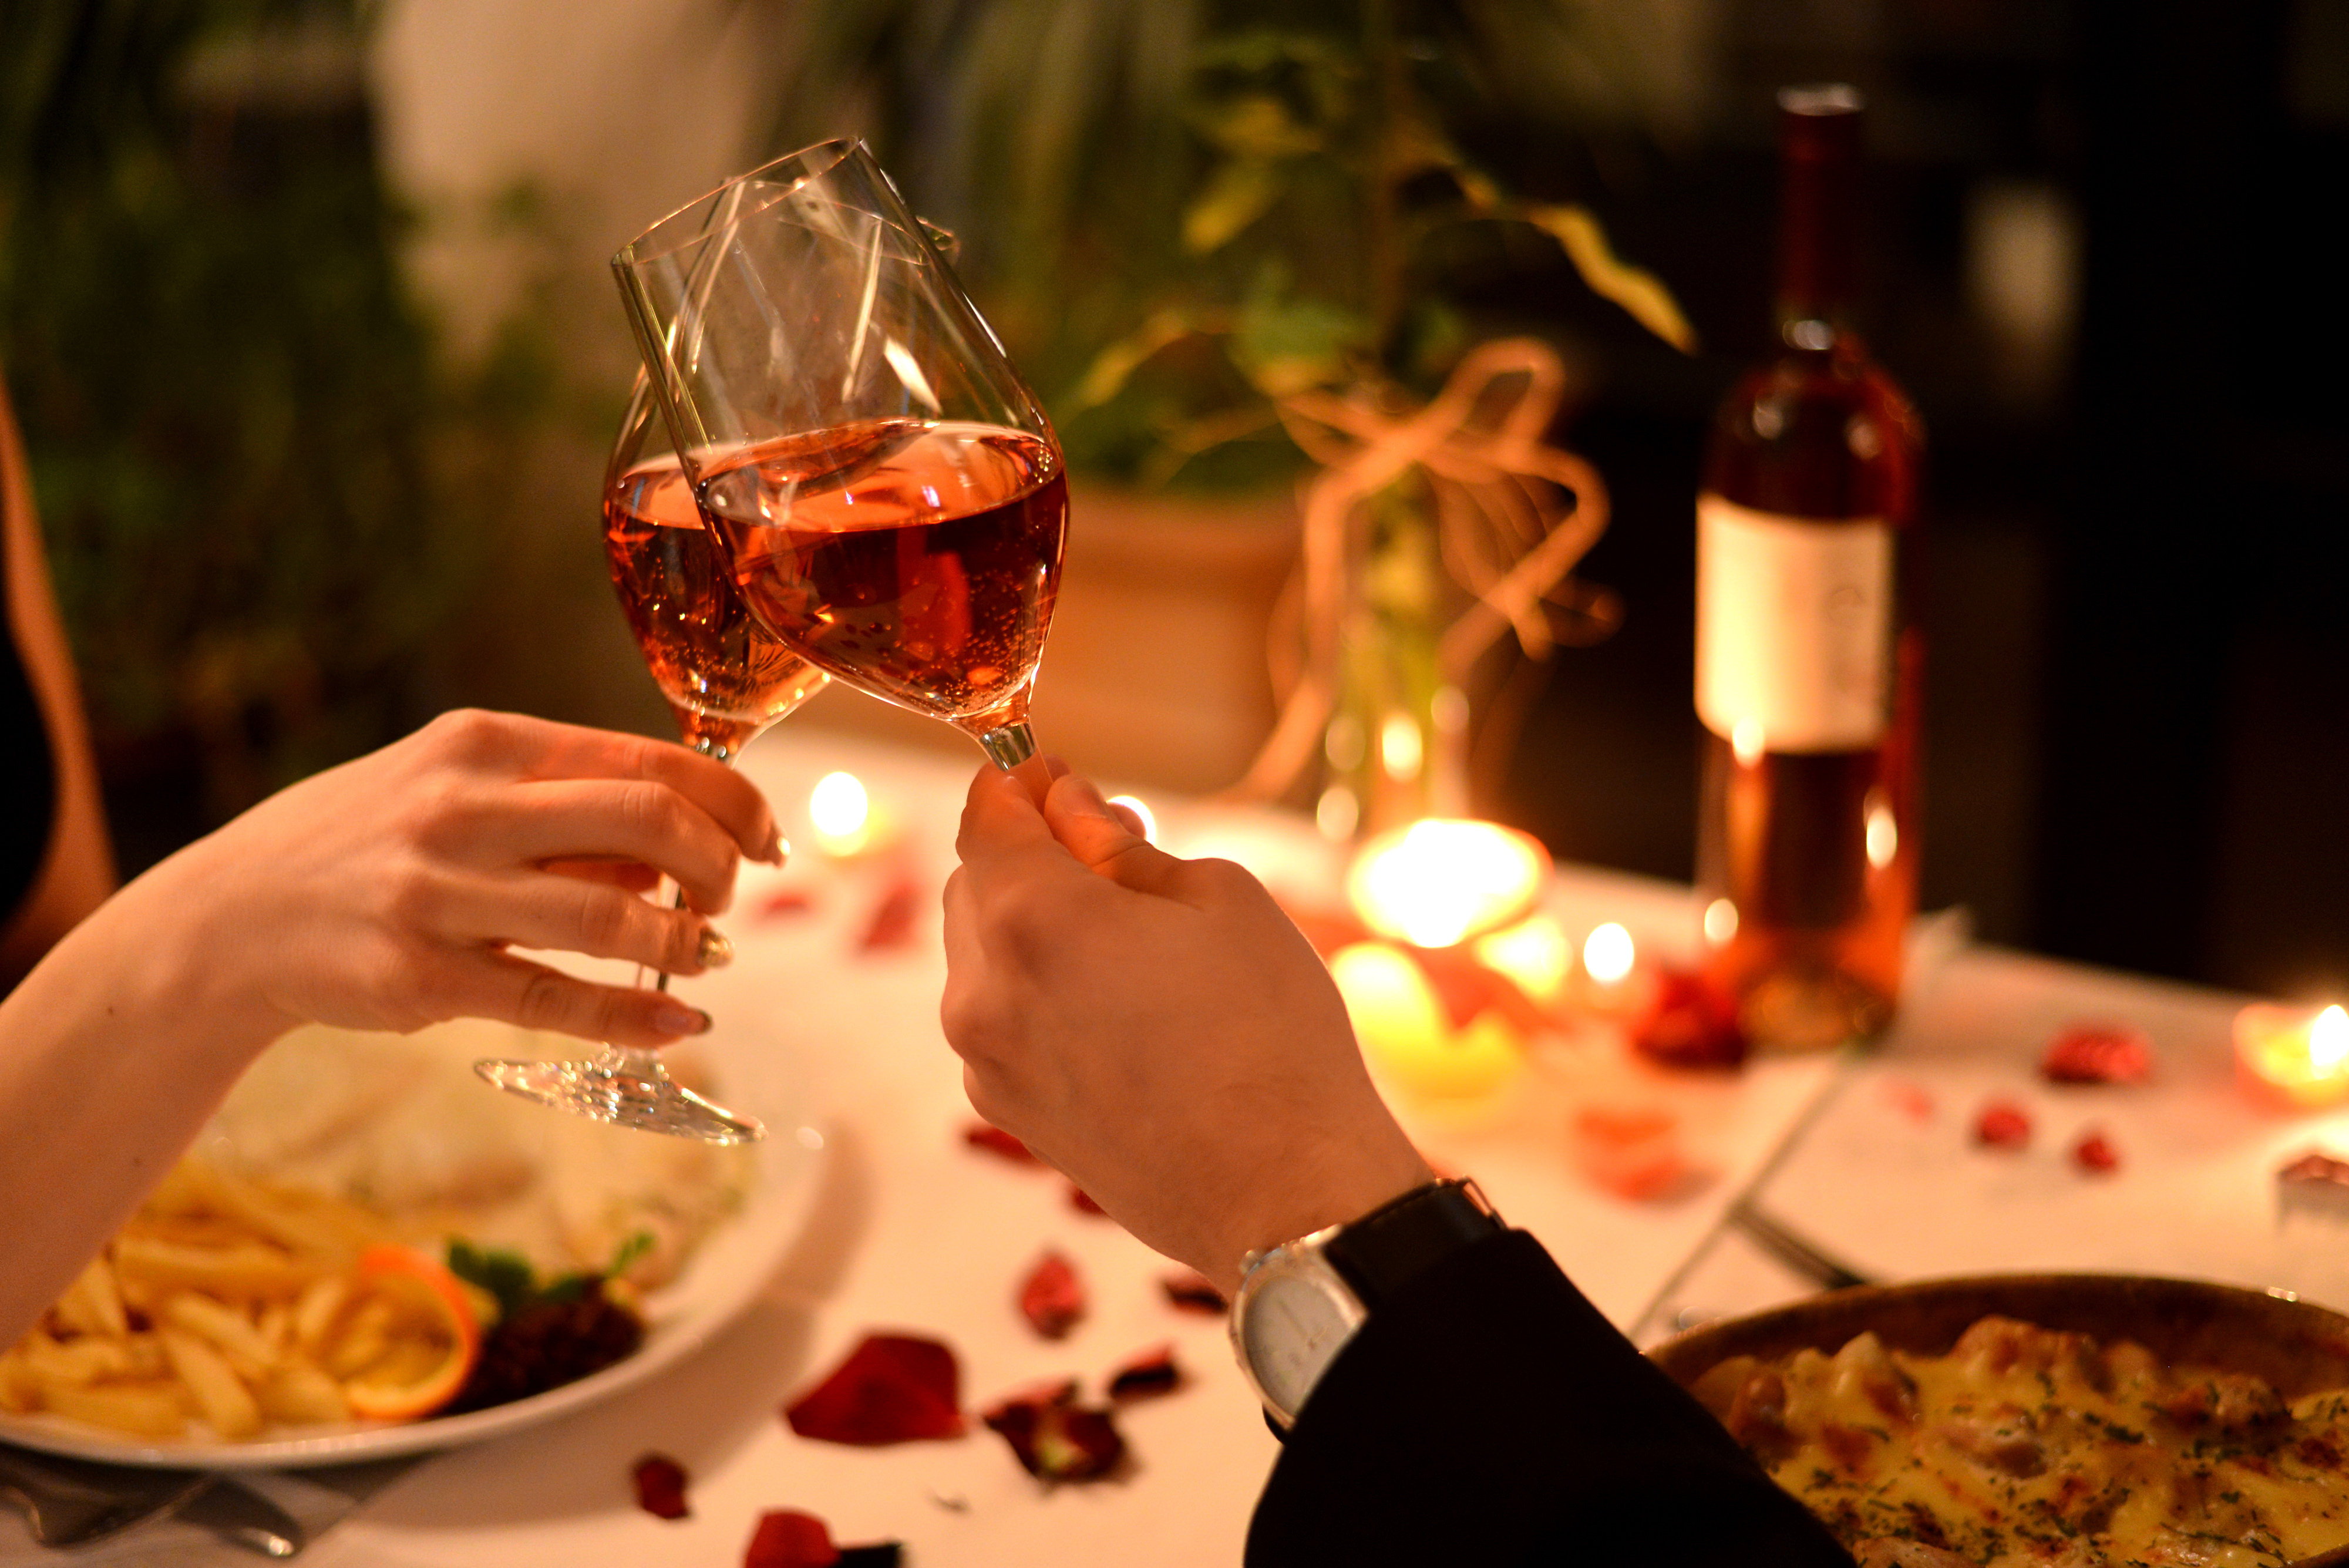 A couple clinking wine glasses during a romantic dinner | Source: Shutterstock